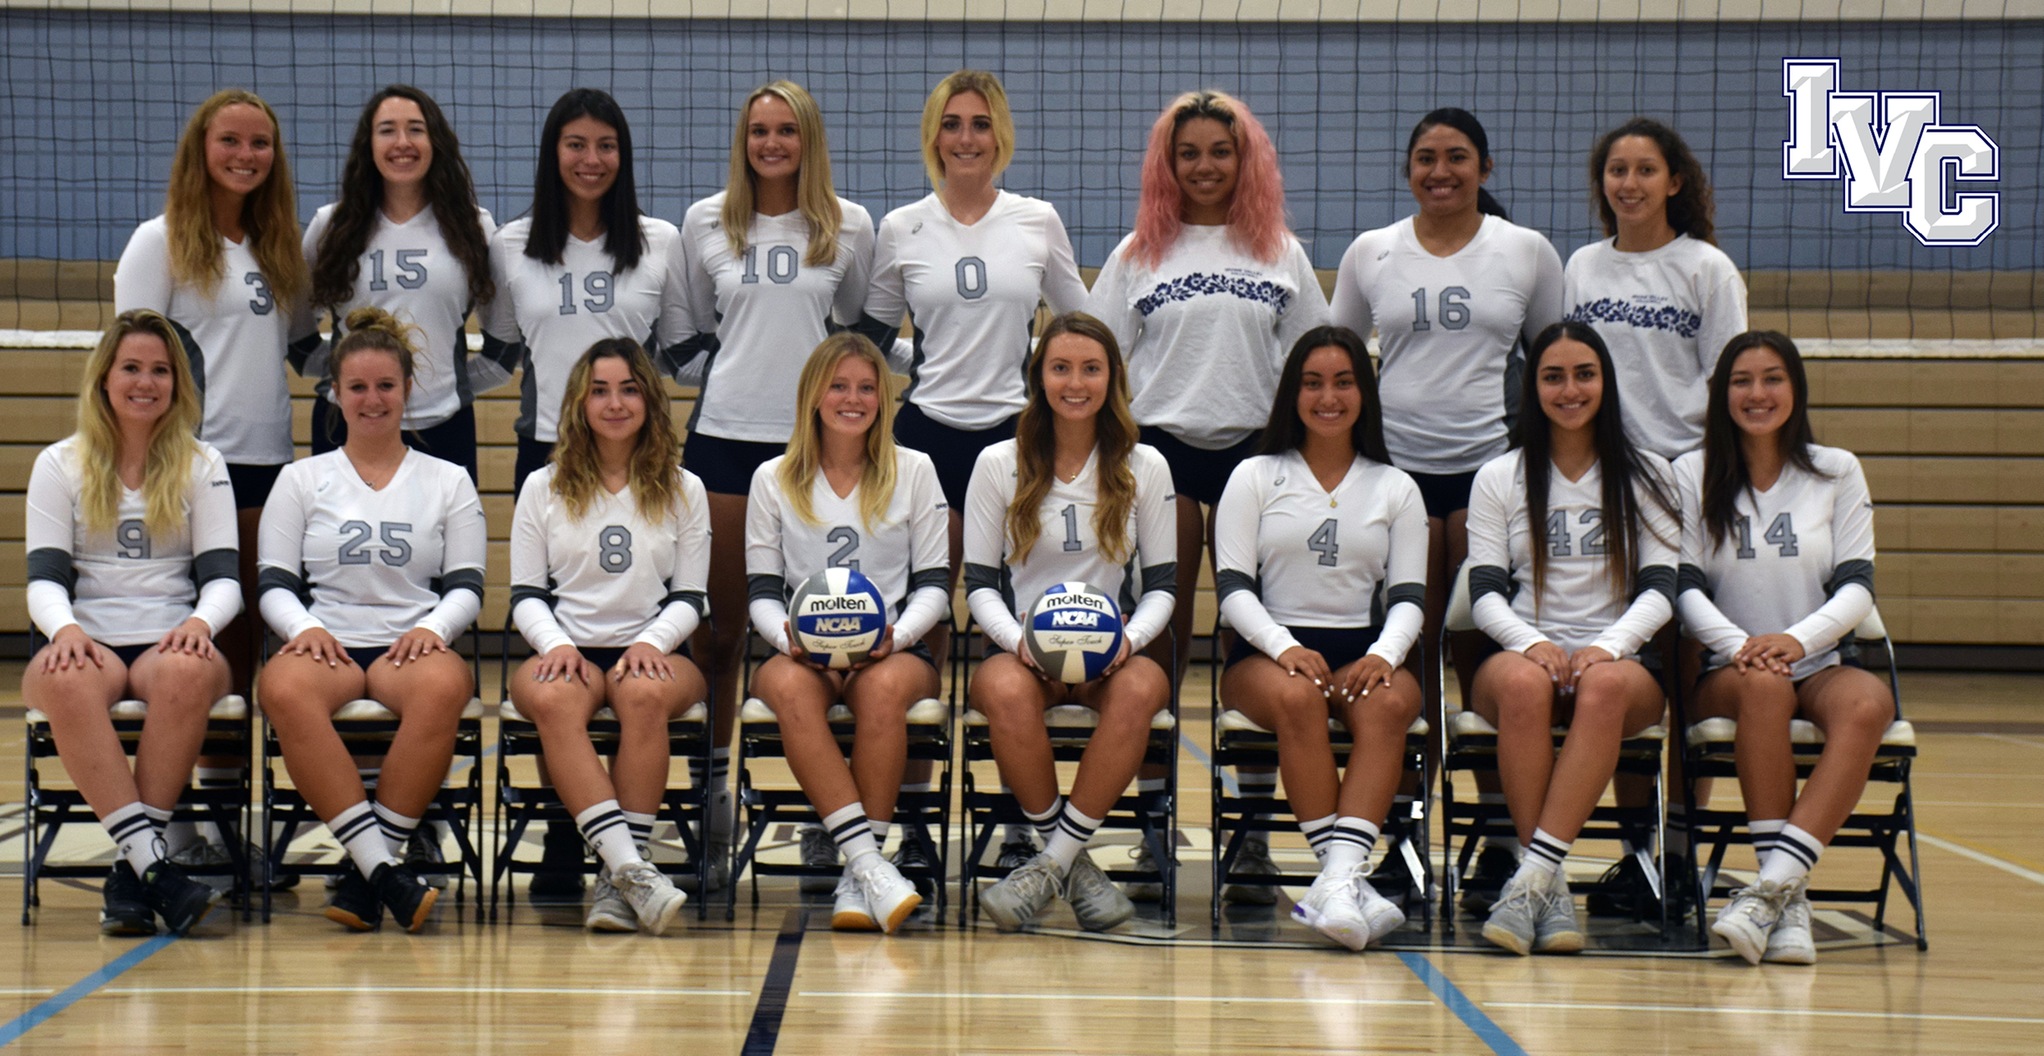 Women's volleyball is Irvine Valley's '19-20 team of the year